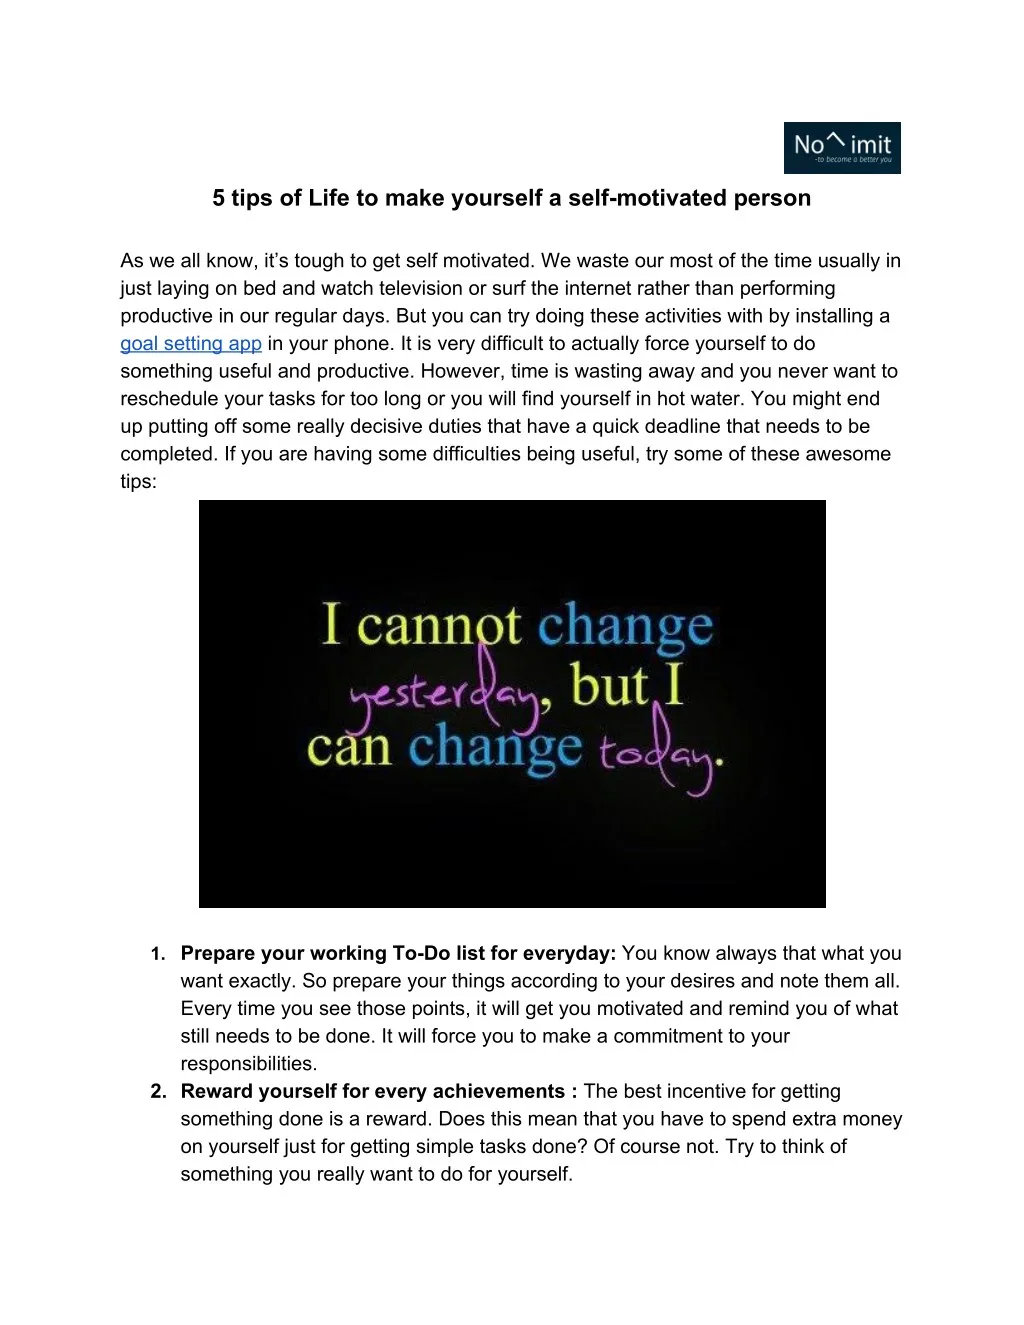 5 tips of life to make yourself a self motivated